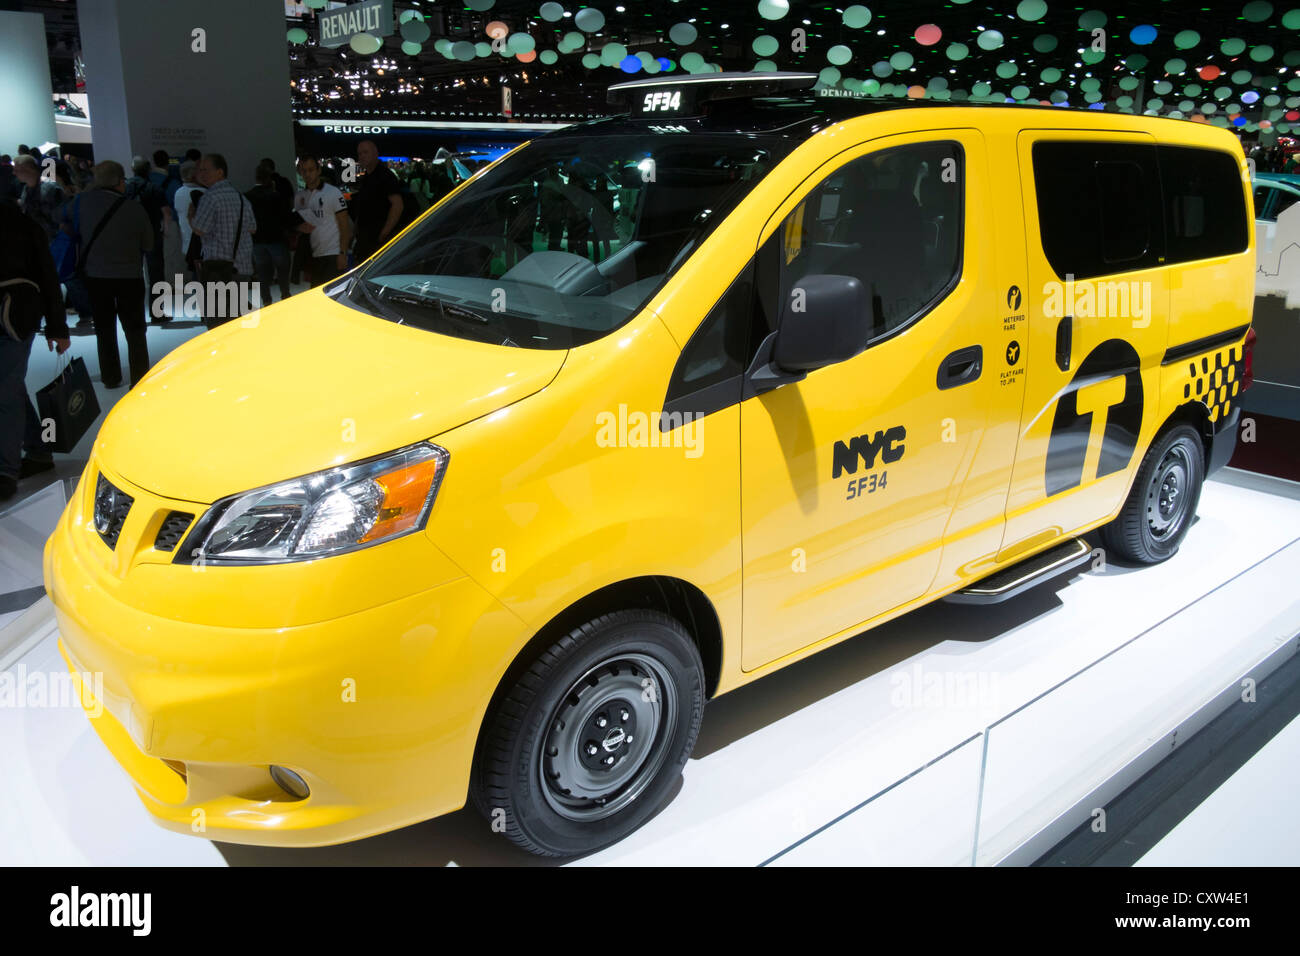 New Nissan van in livery of New York City (NYC) Taxi at Paris Motor Show 2012 Stock Photo